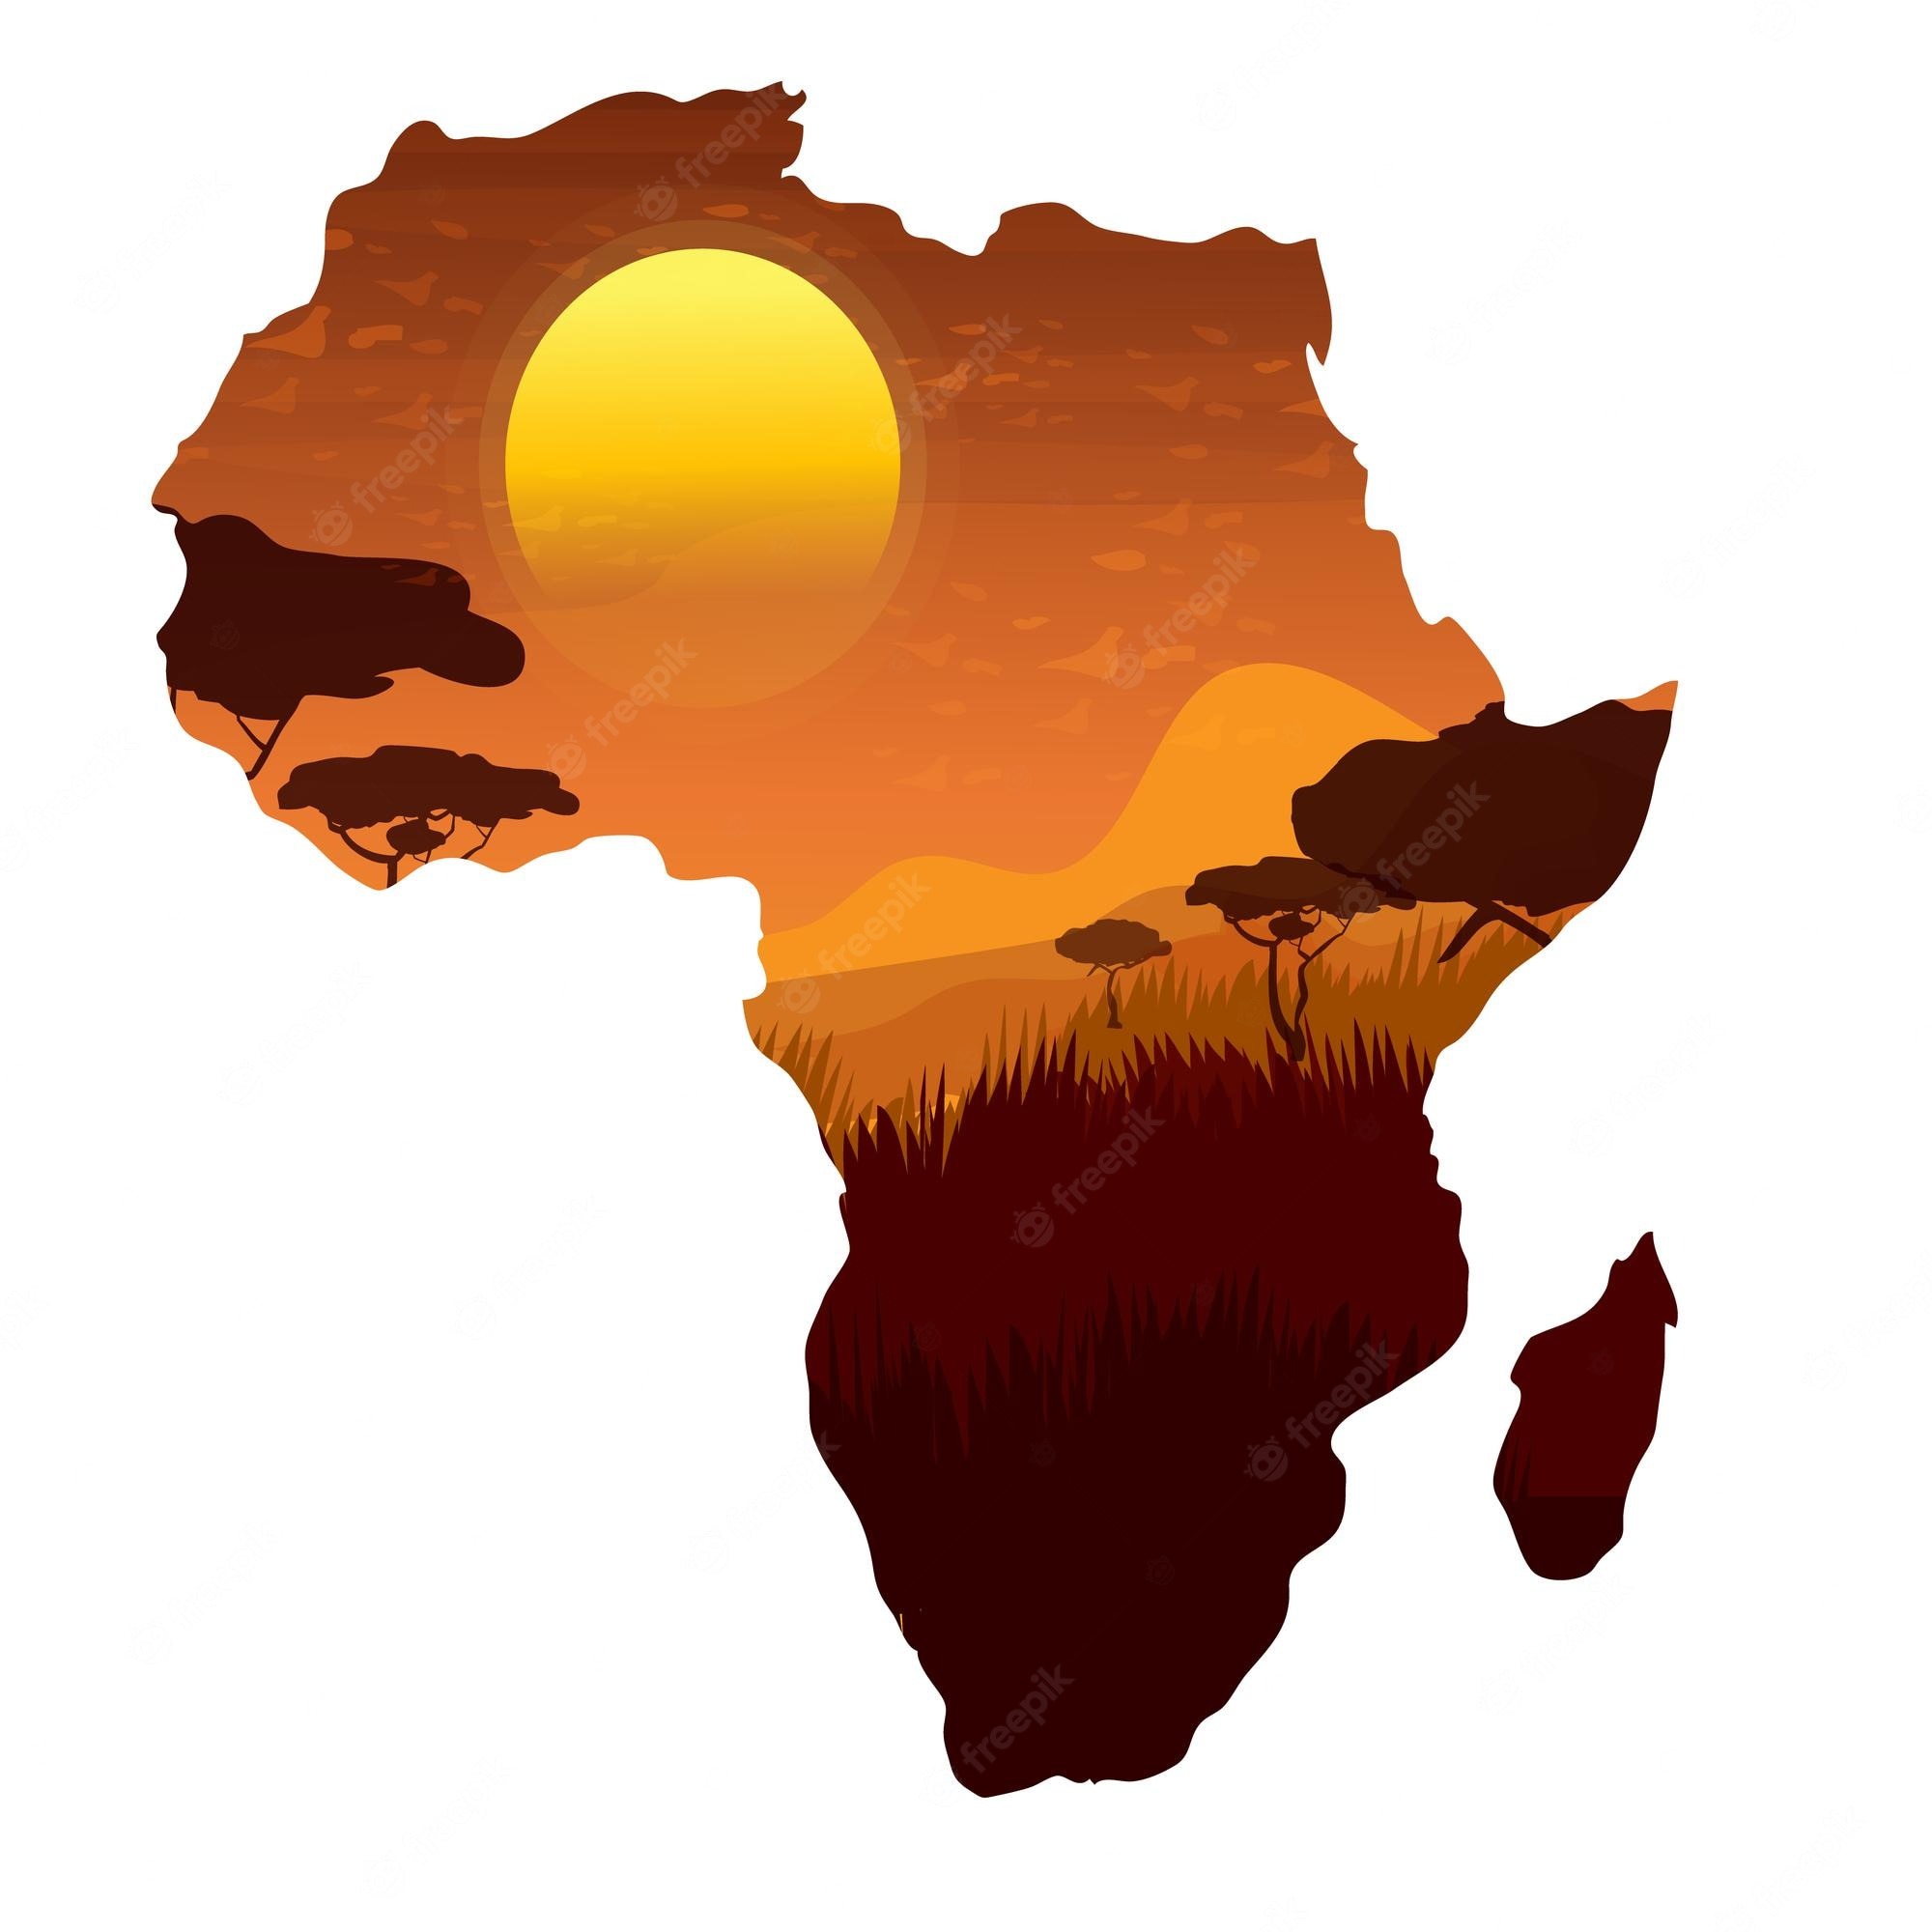 Africa: A Continent of Diversity, Resilience, and Cultural Richness